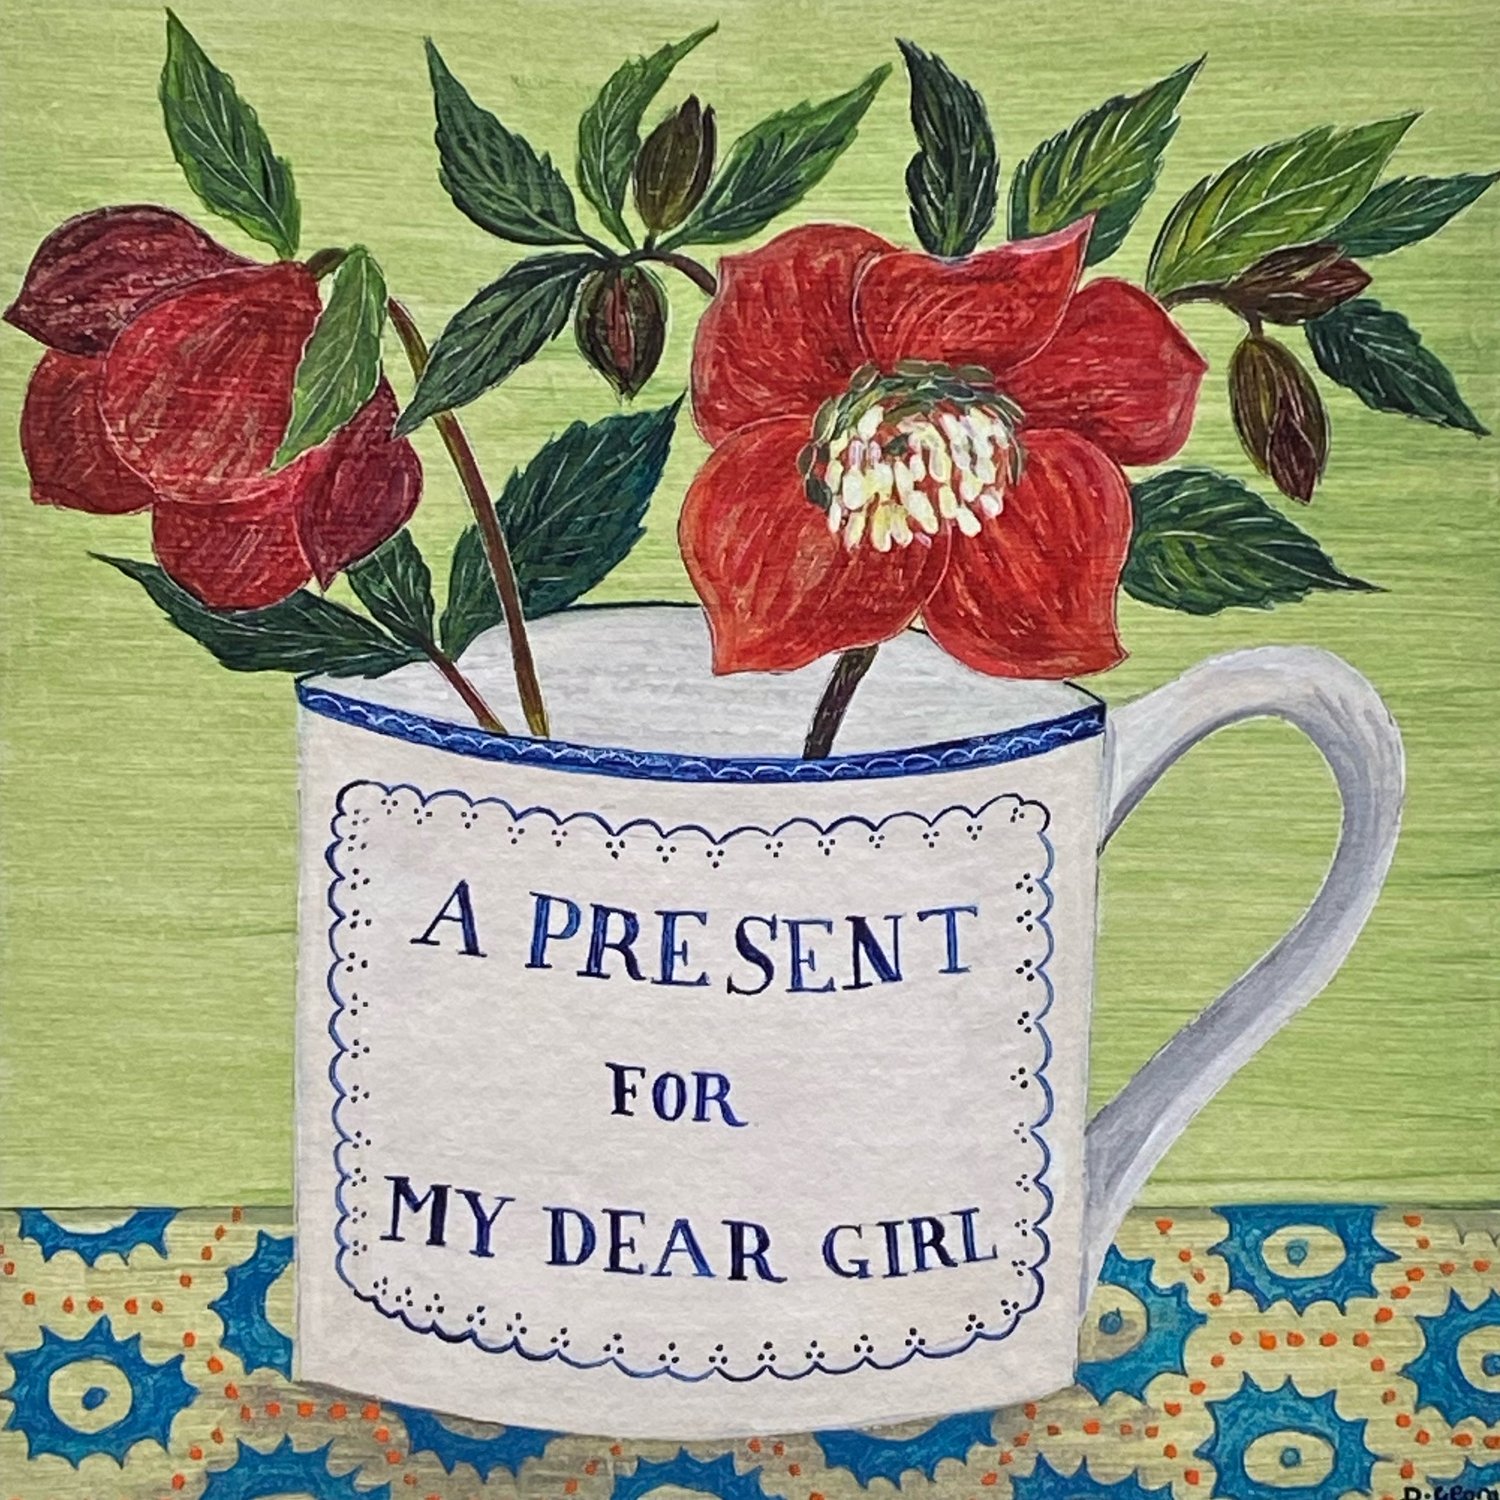 Image of Dear girl cup and Hellebores Giclee print